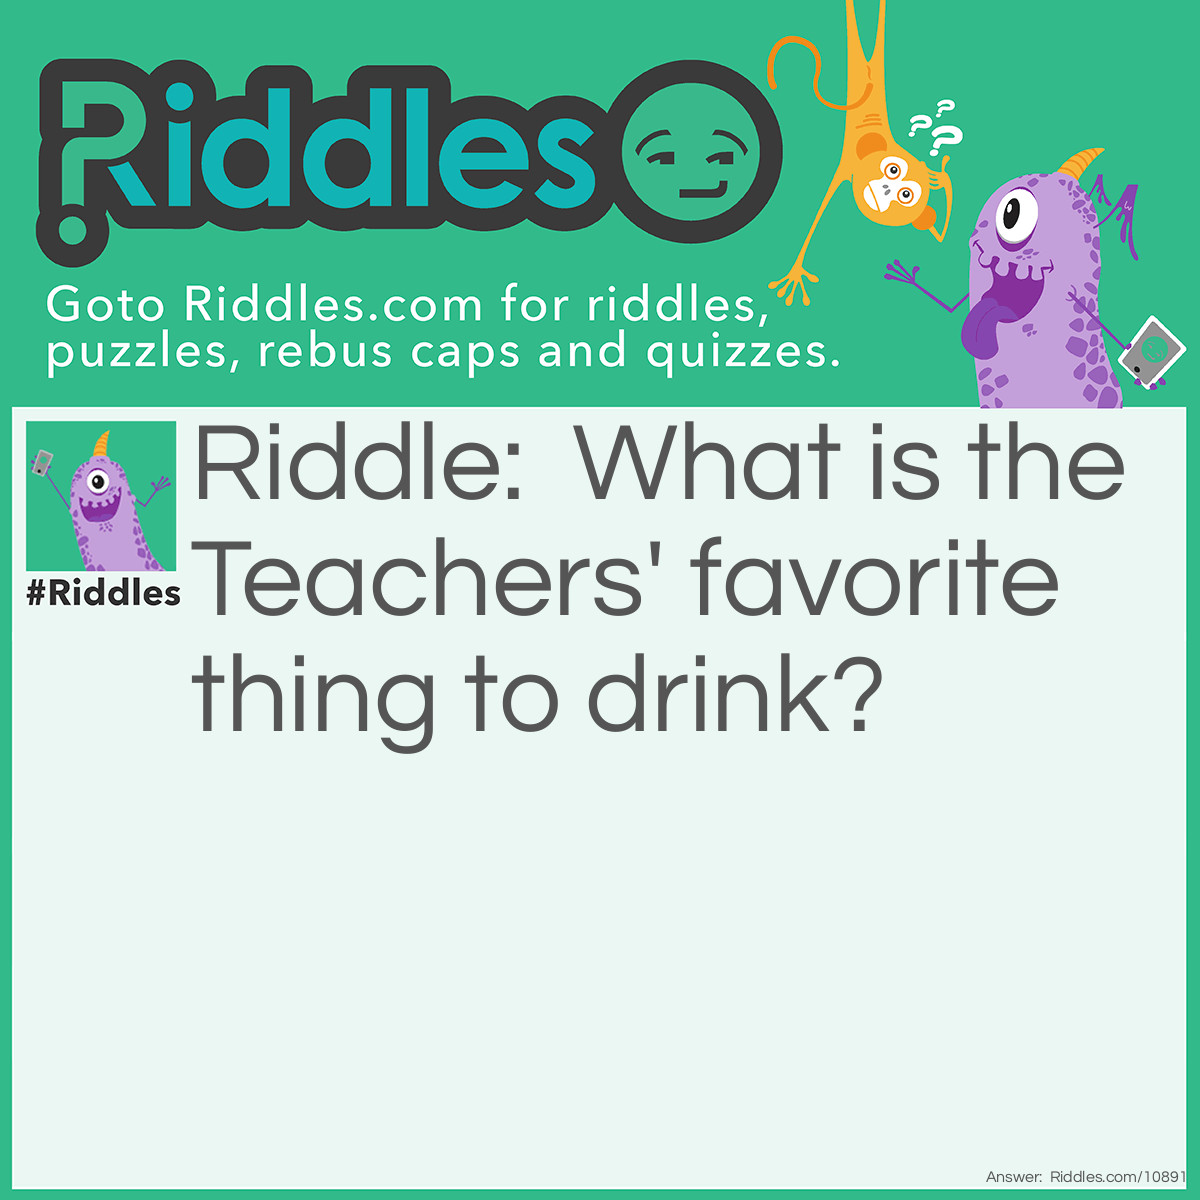 Riddle: What is the Teachers' favorite thing to drink? Answer: TEA.